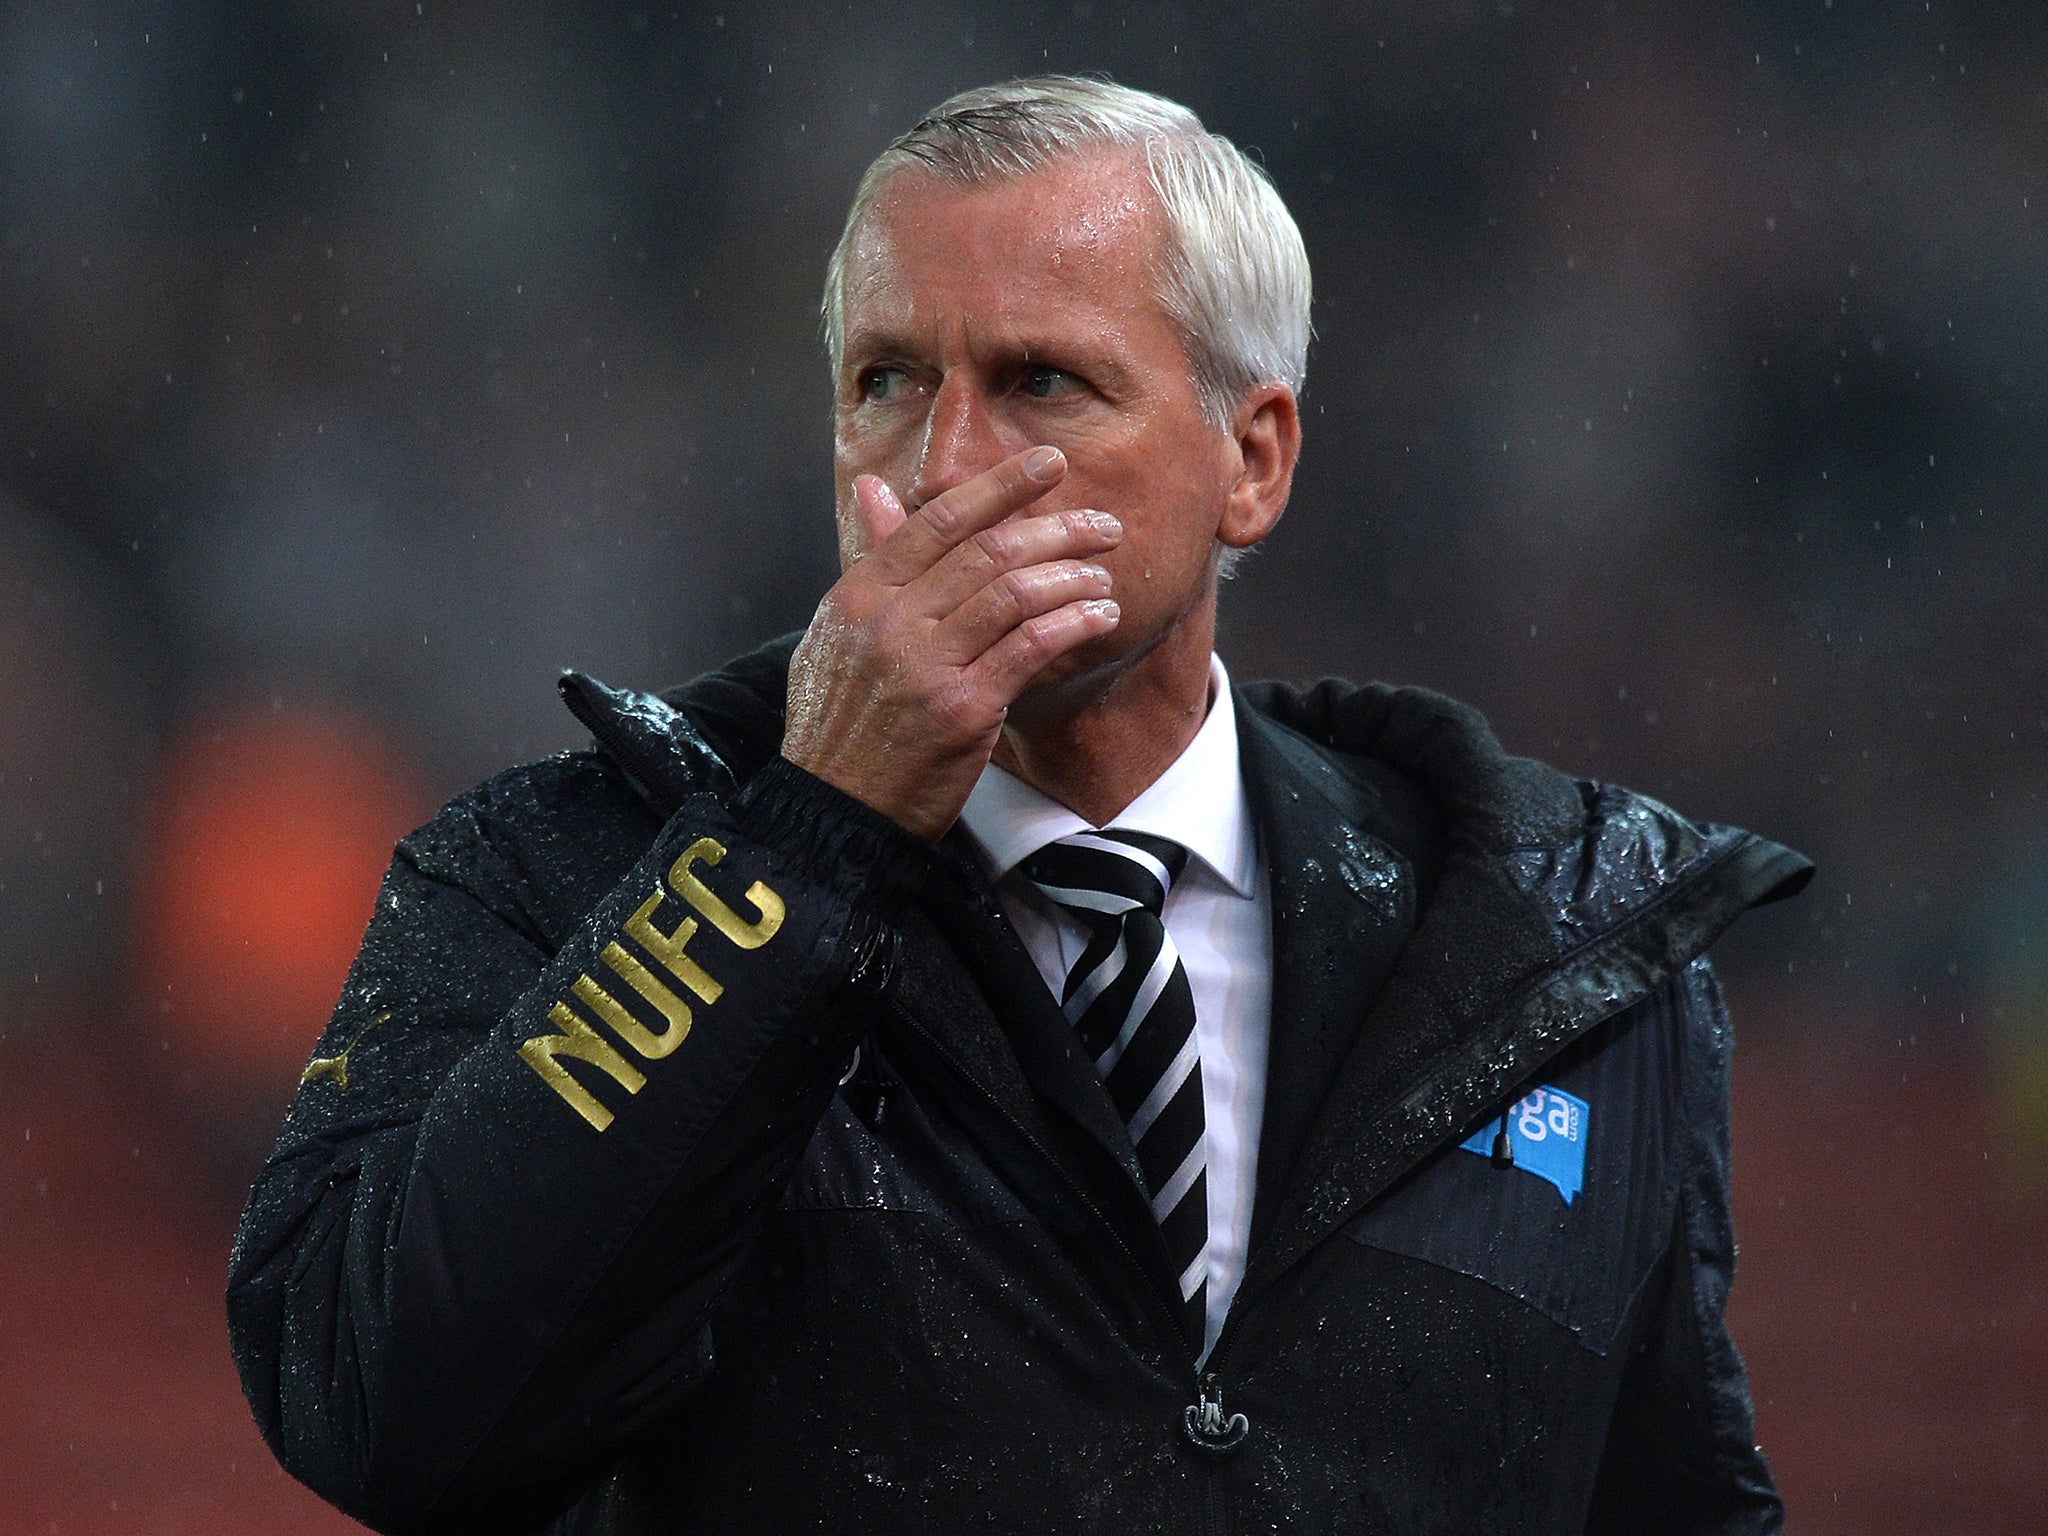 Alan Pardew at the match between Newcastle and Stoke